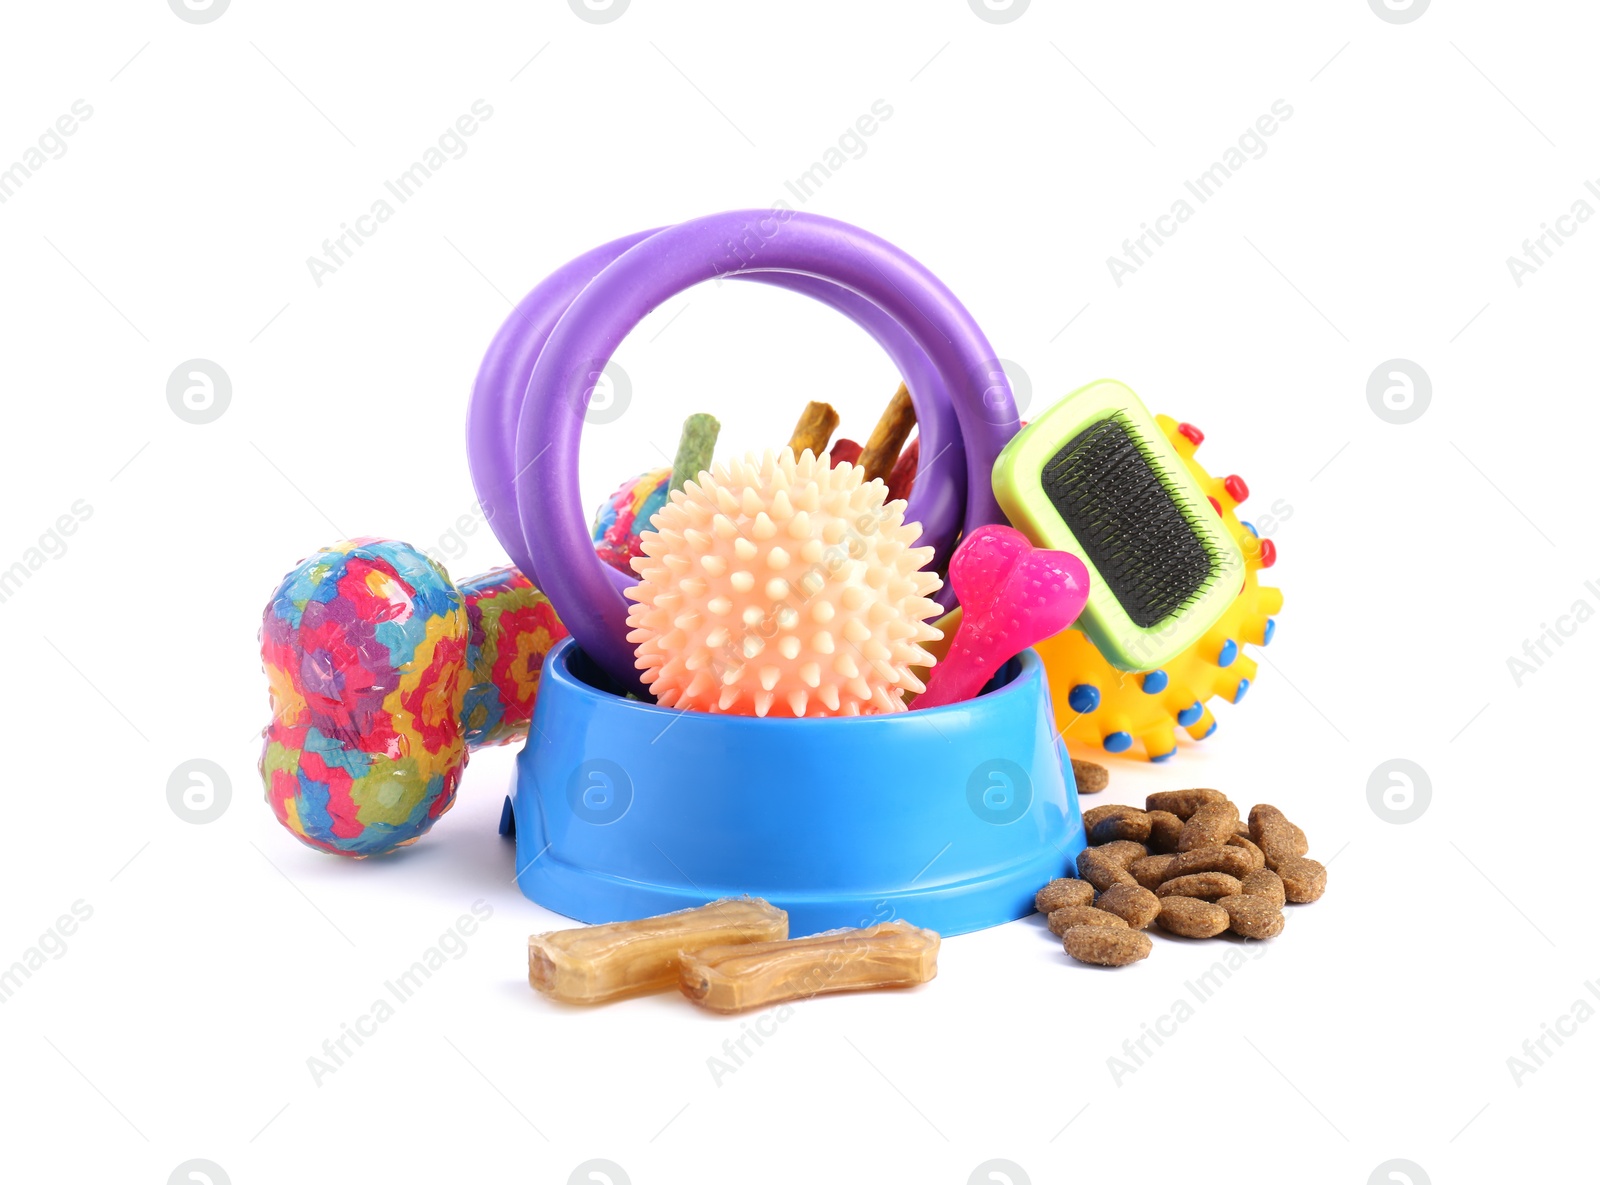 Photo of Dry pet food, toys and other goods isolated on white. Shop items